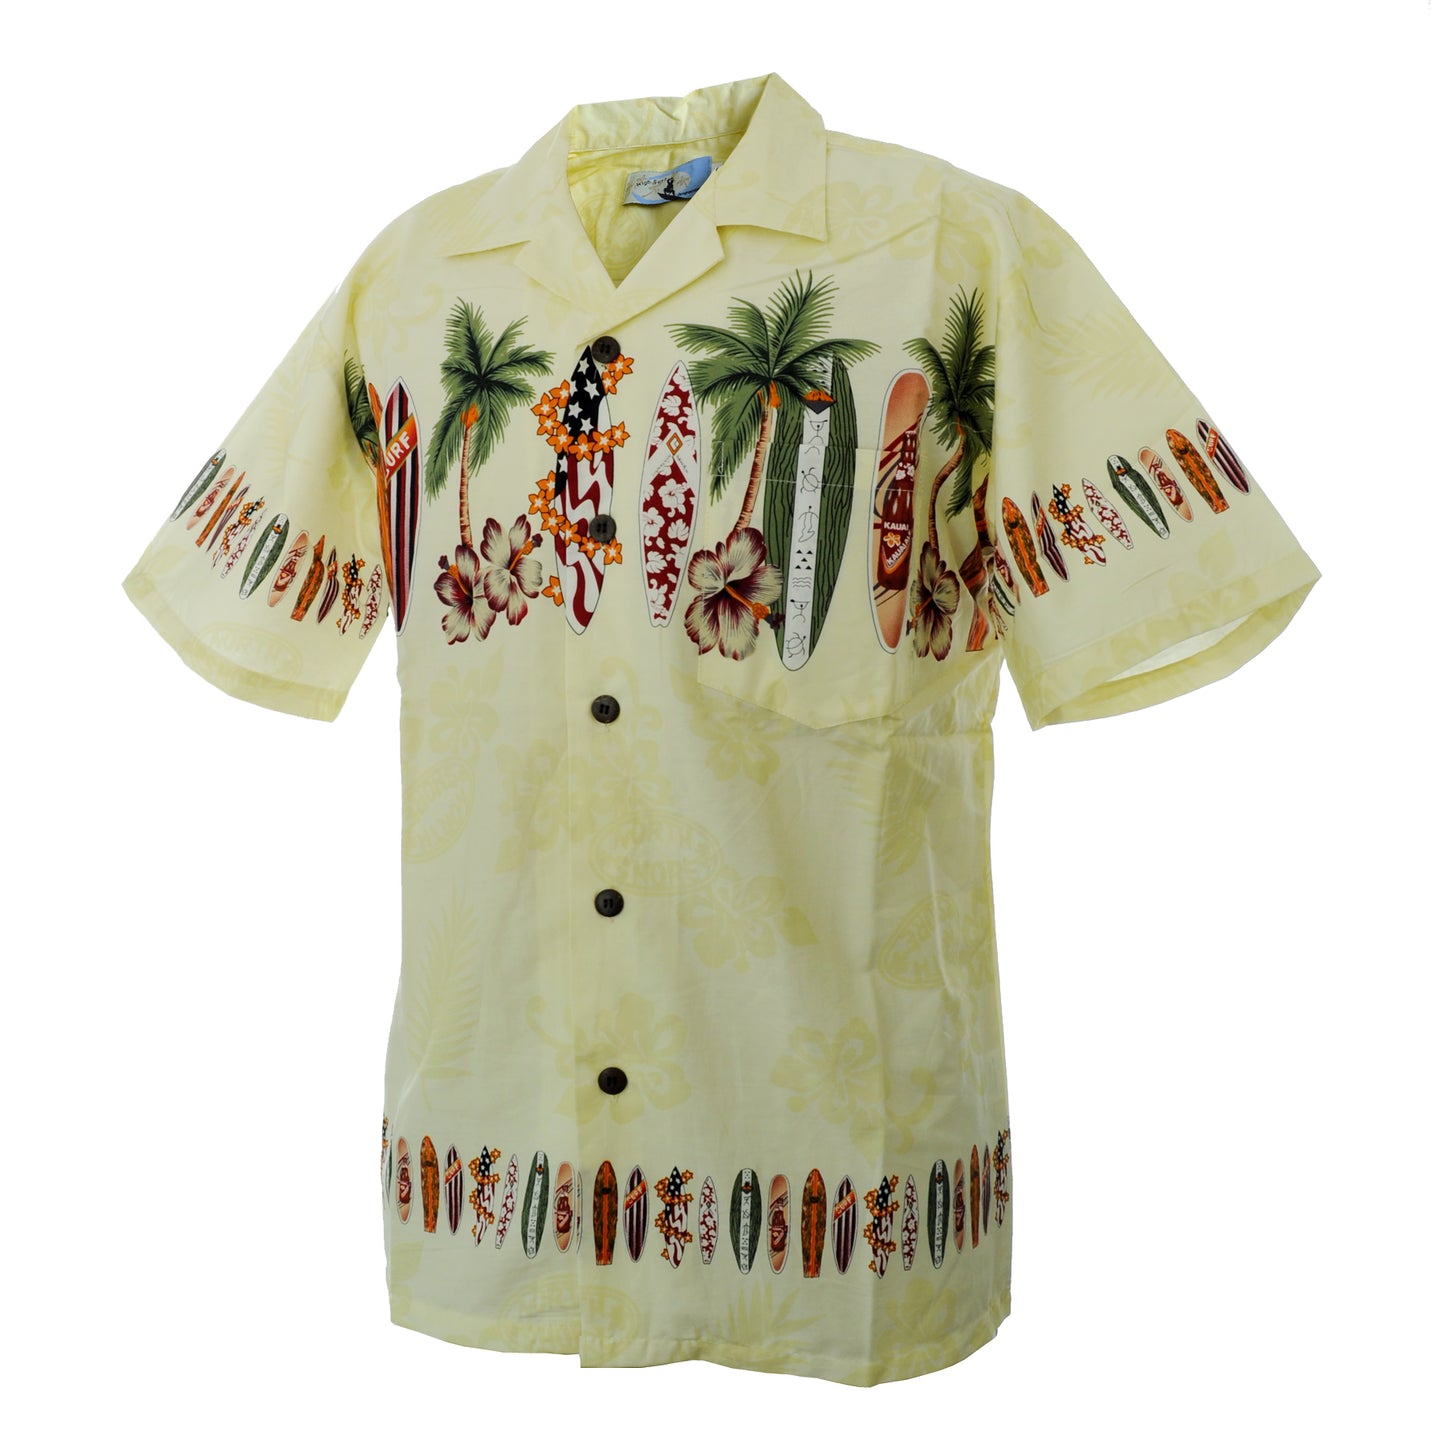 High Surf Men's Hawaiian Shirt depicting Palm Trees, Cars and Surfboards in Yellow. Front View.